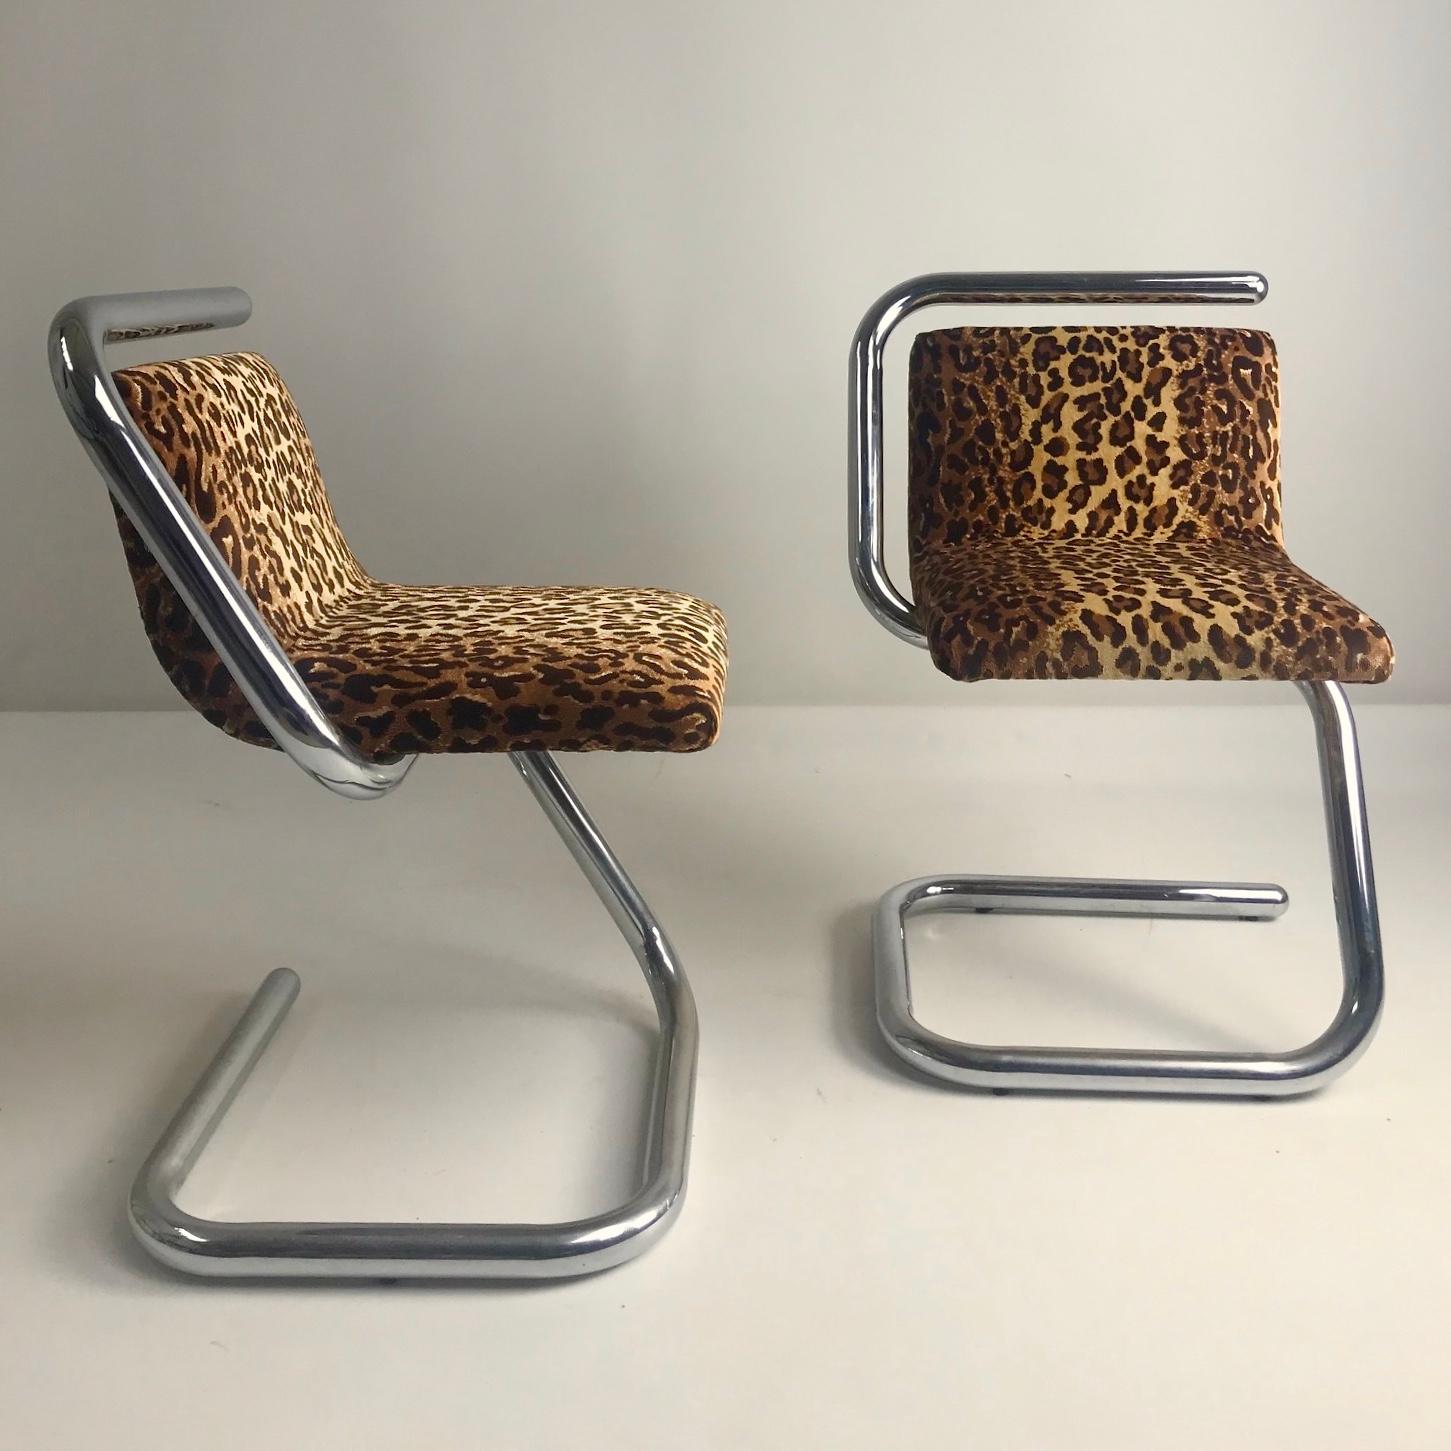 Late 20th Century Pair of Mid-Century Modern Chairs, Chrome & Leopard Fabric, circa 1970, Italy